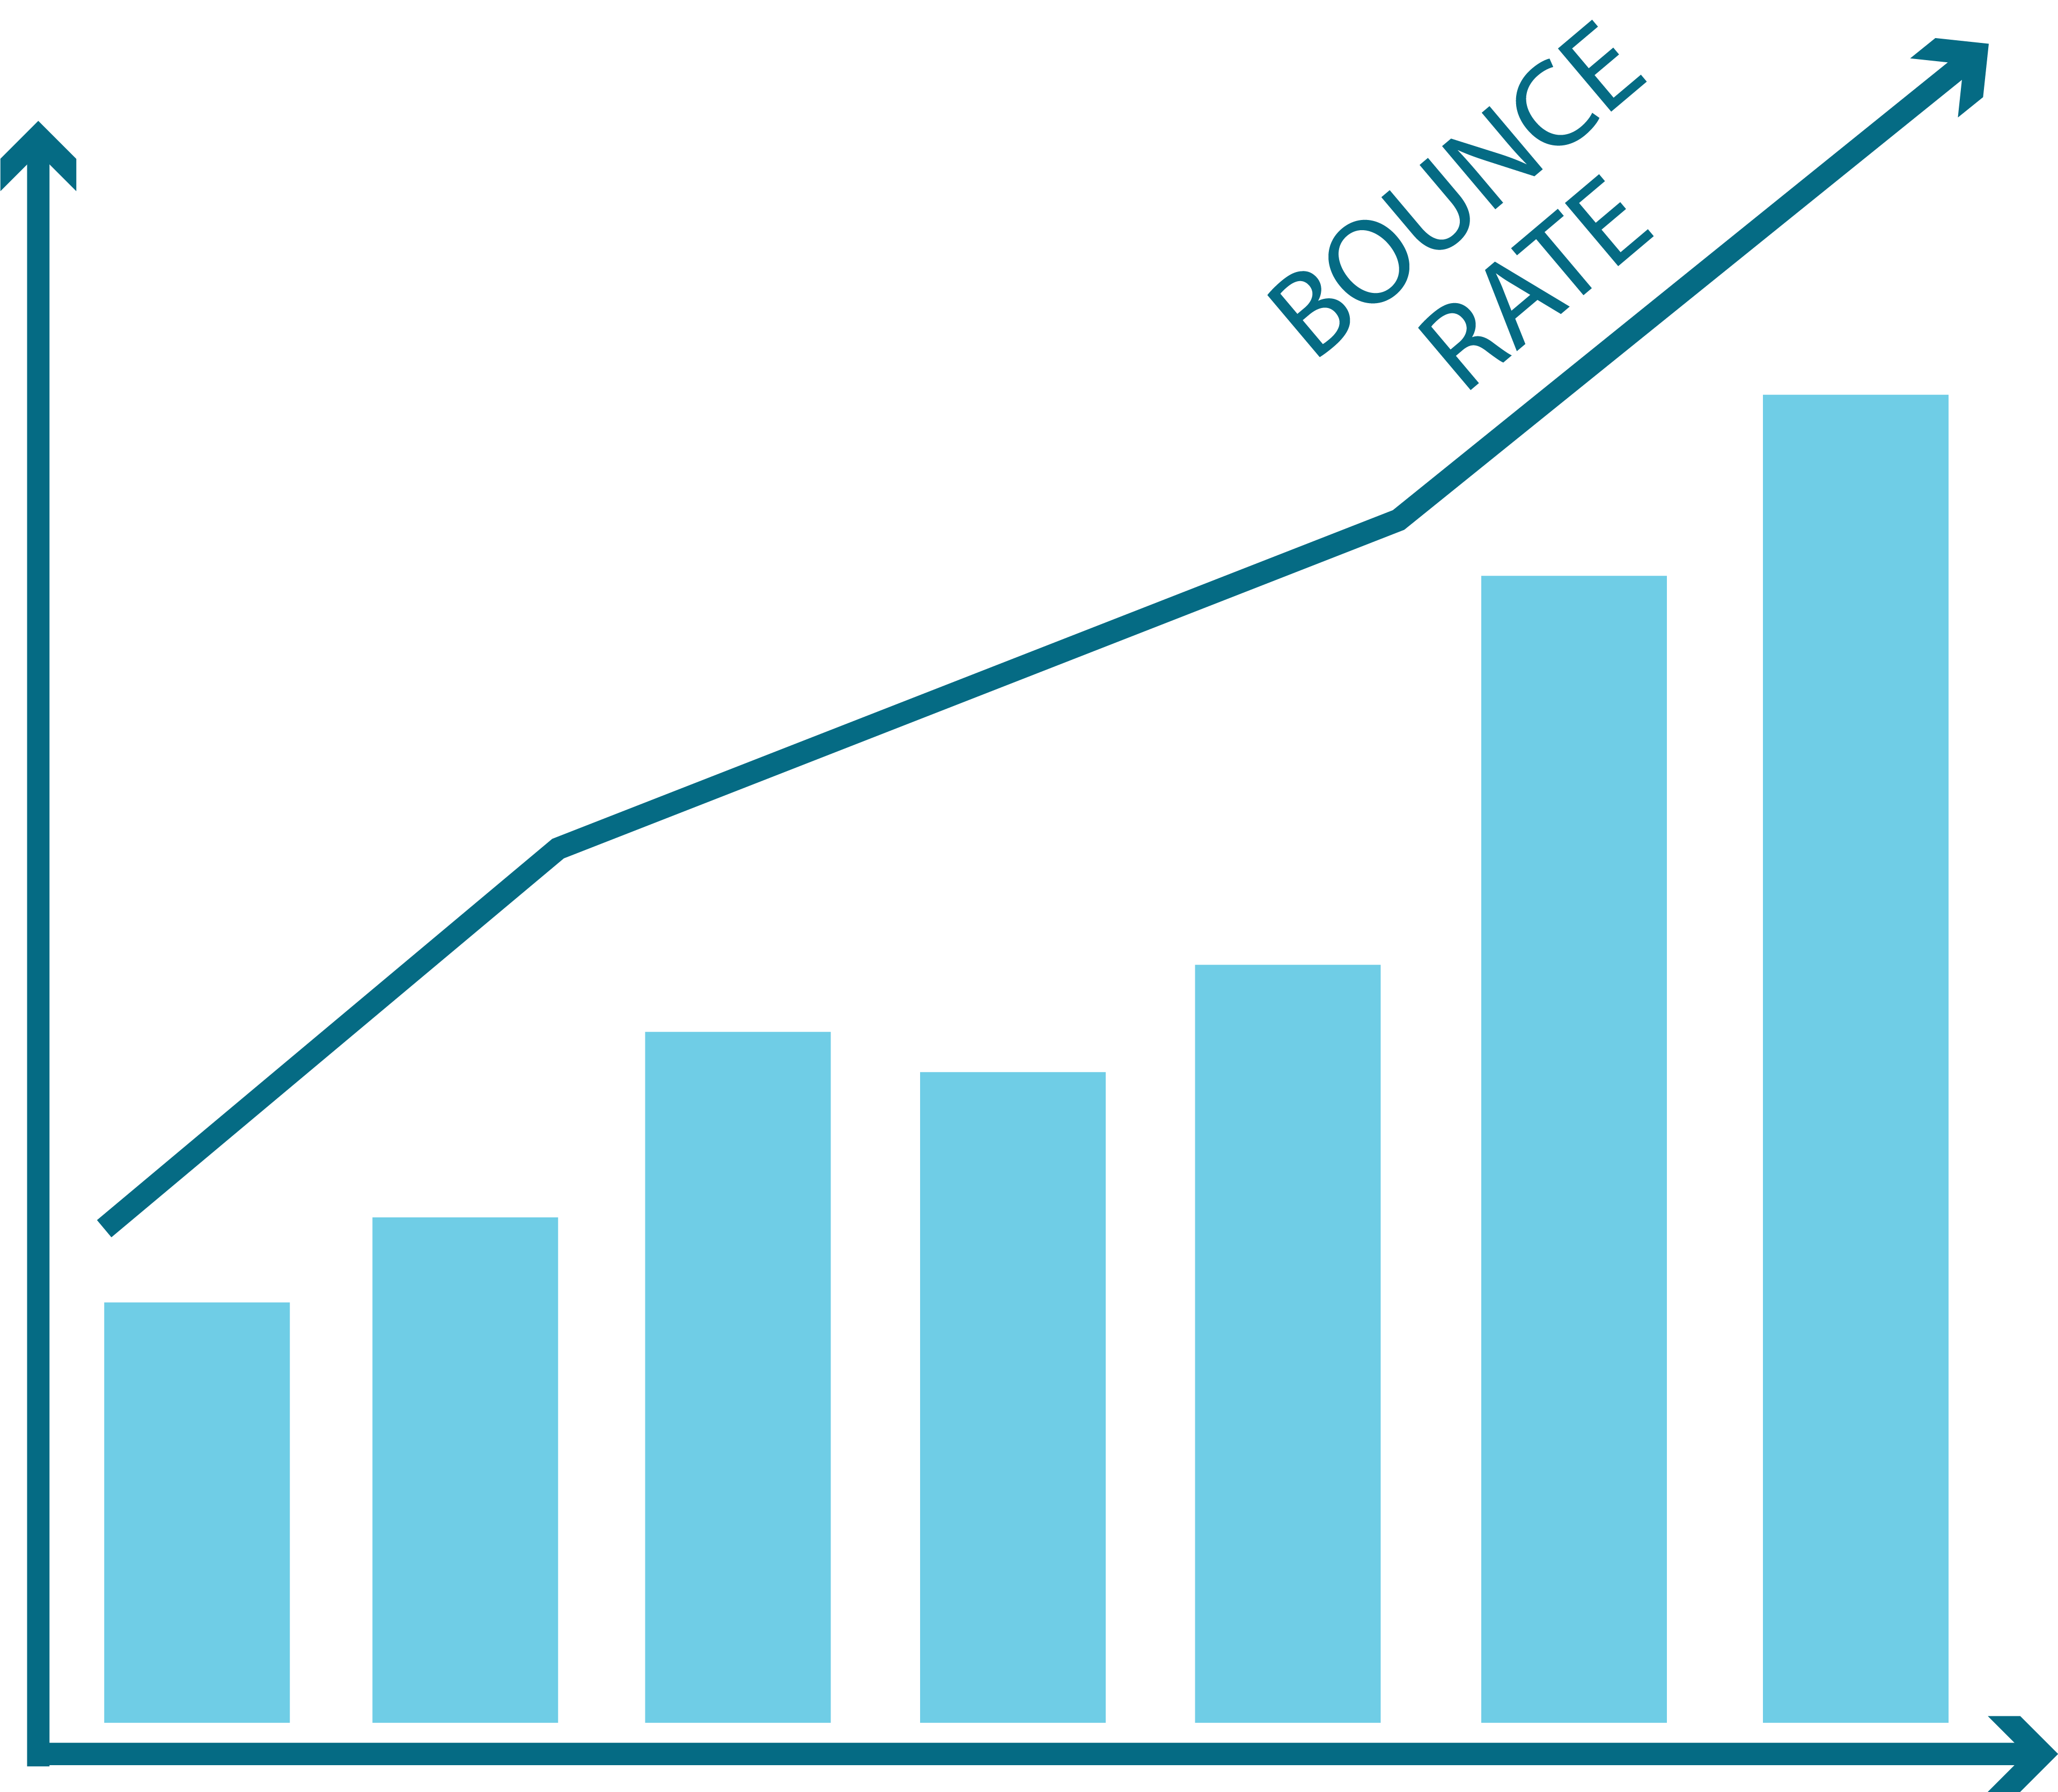 bar graph showing a high bounce rate - bounce rate and exit rate